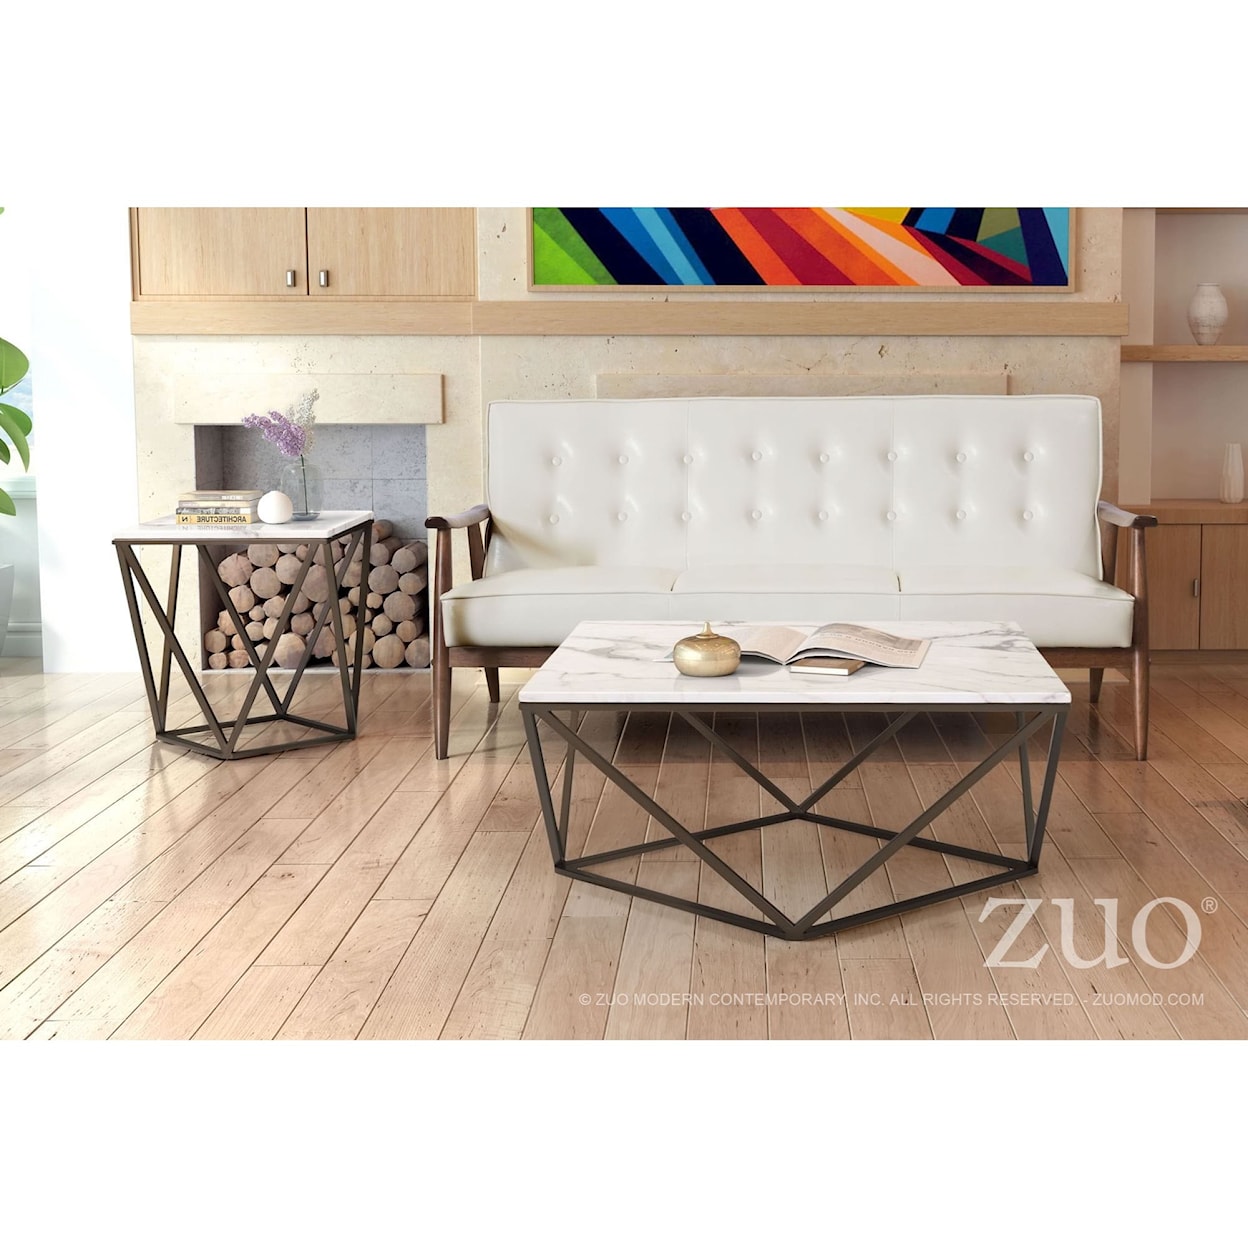 Zuo Tintern End Table